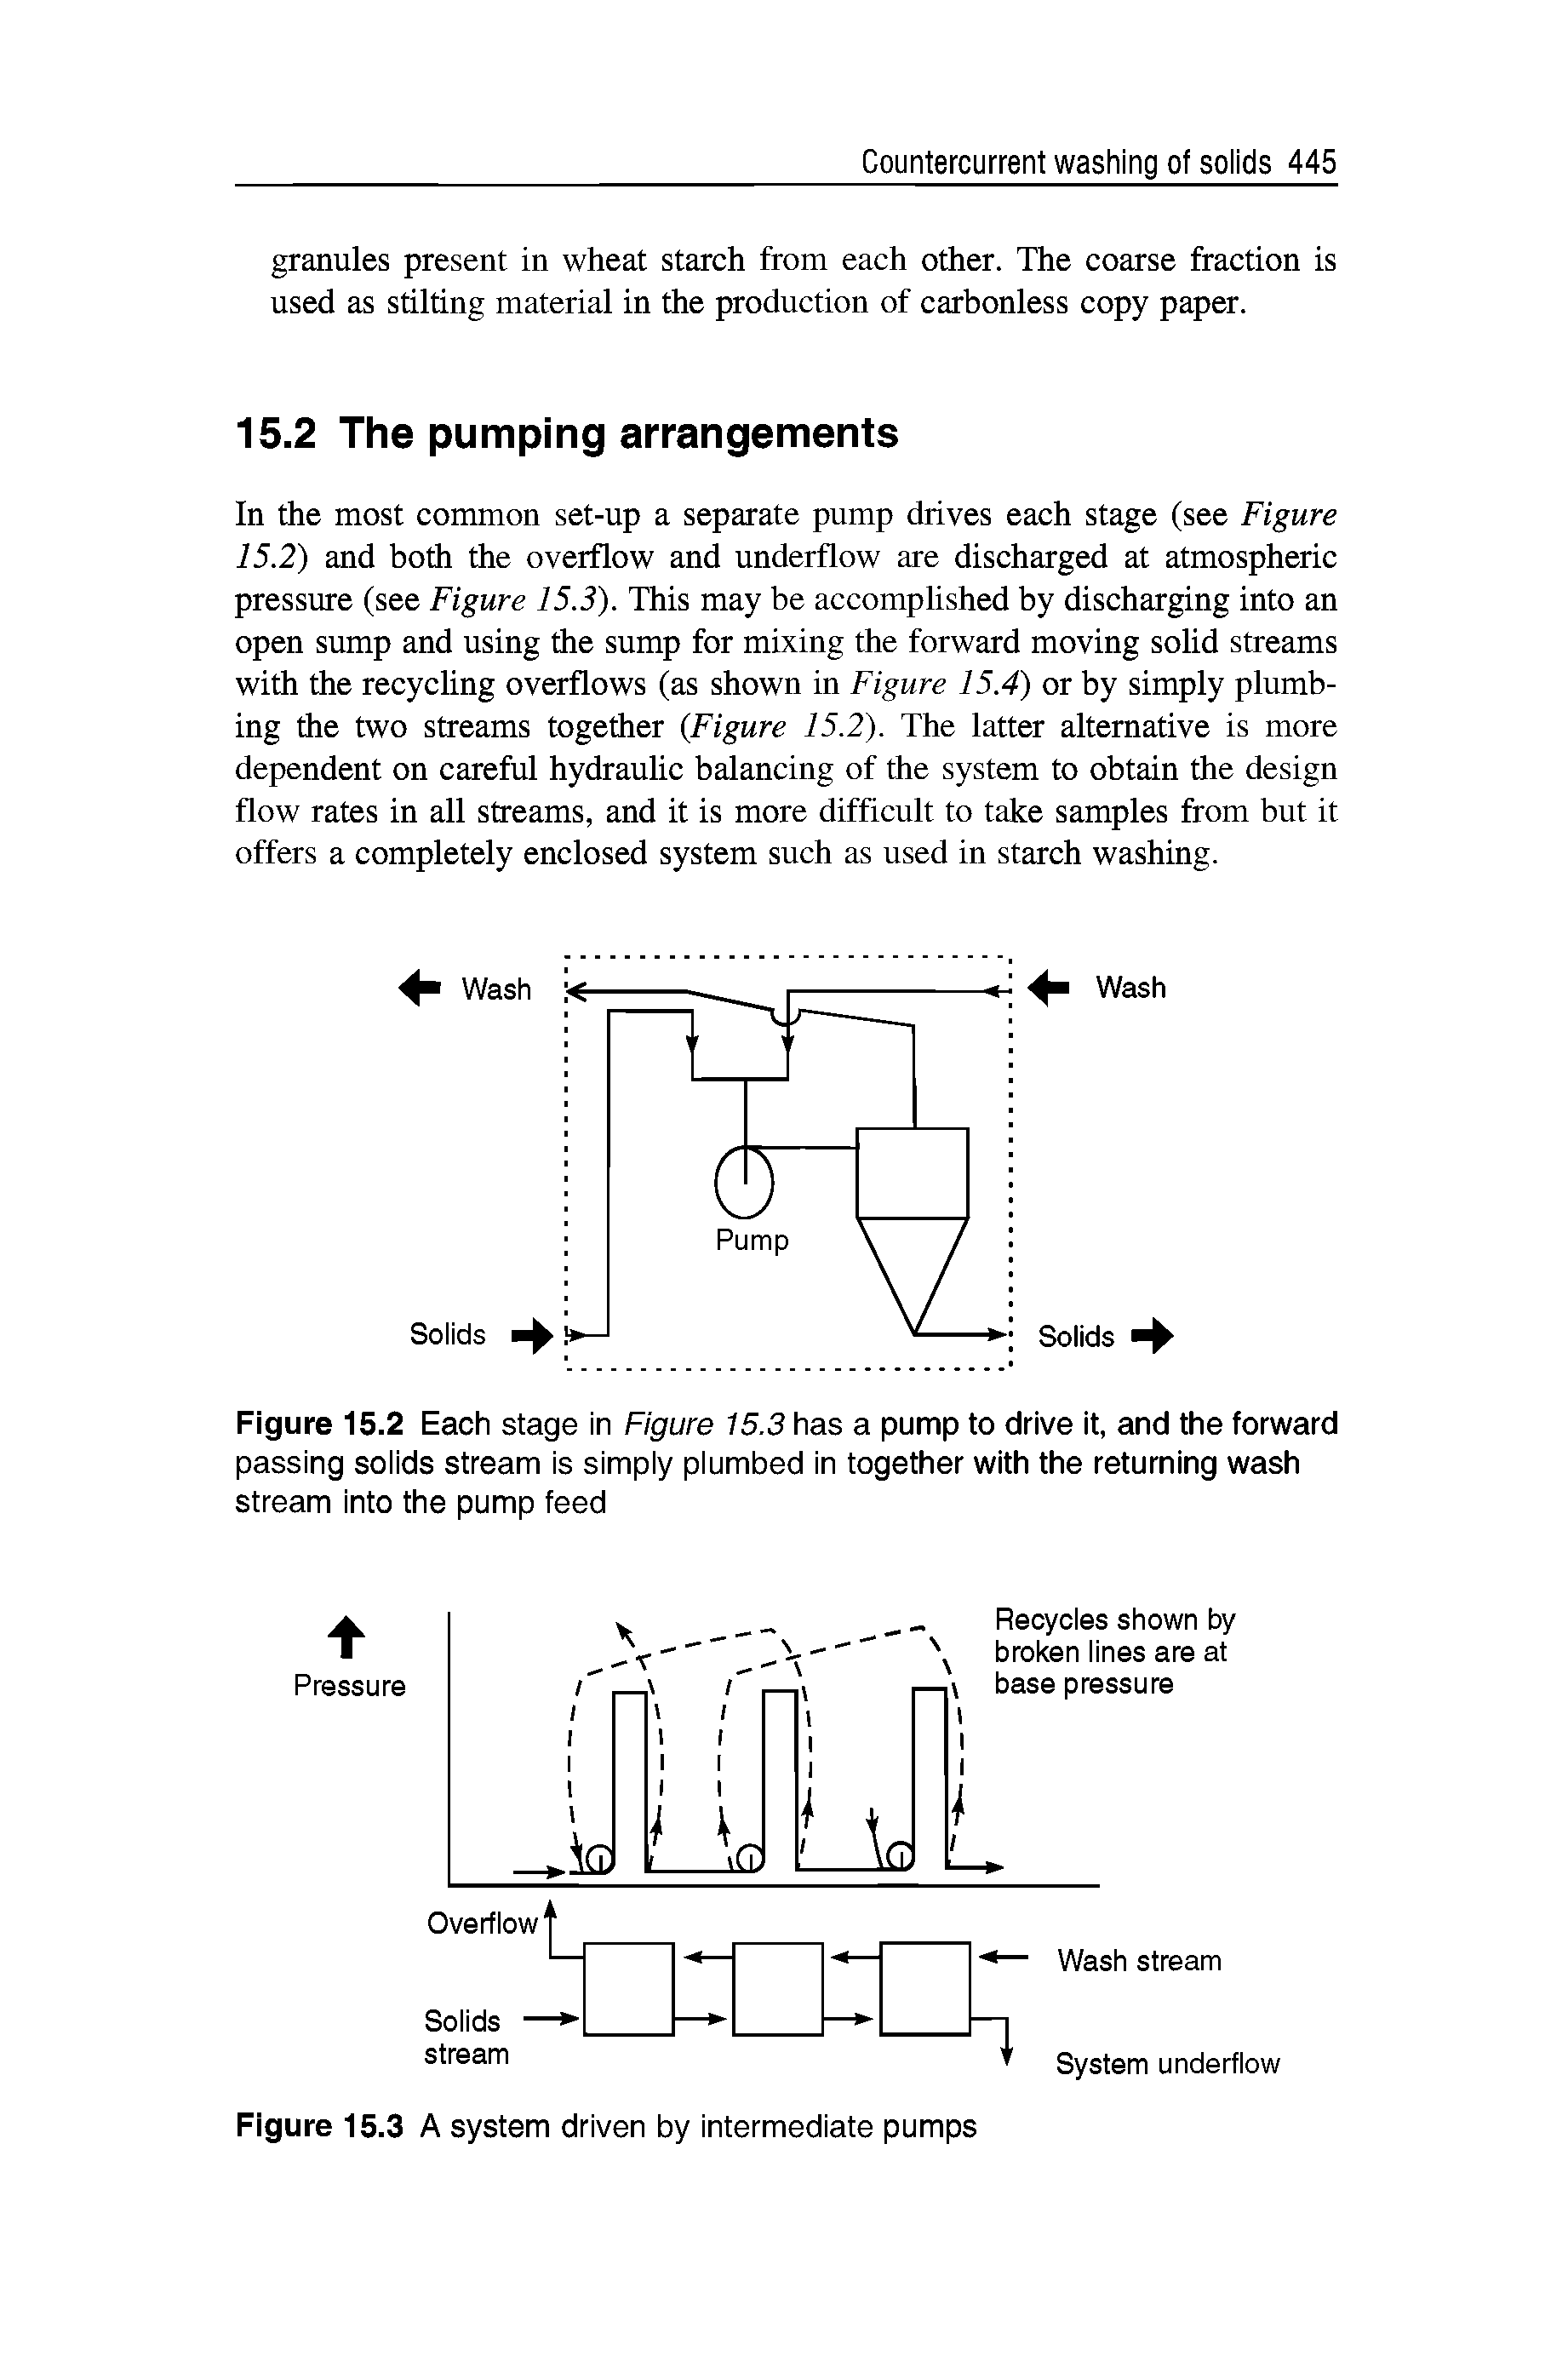 Figure 15.2 Each stage in Figure 15.3 has a pump to drive it, and the forward passing soiids stream is simpiy piumbed in together with the returning wash stream into the pump feed...